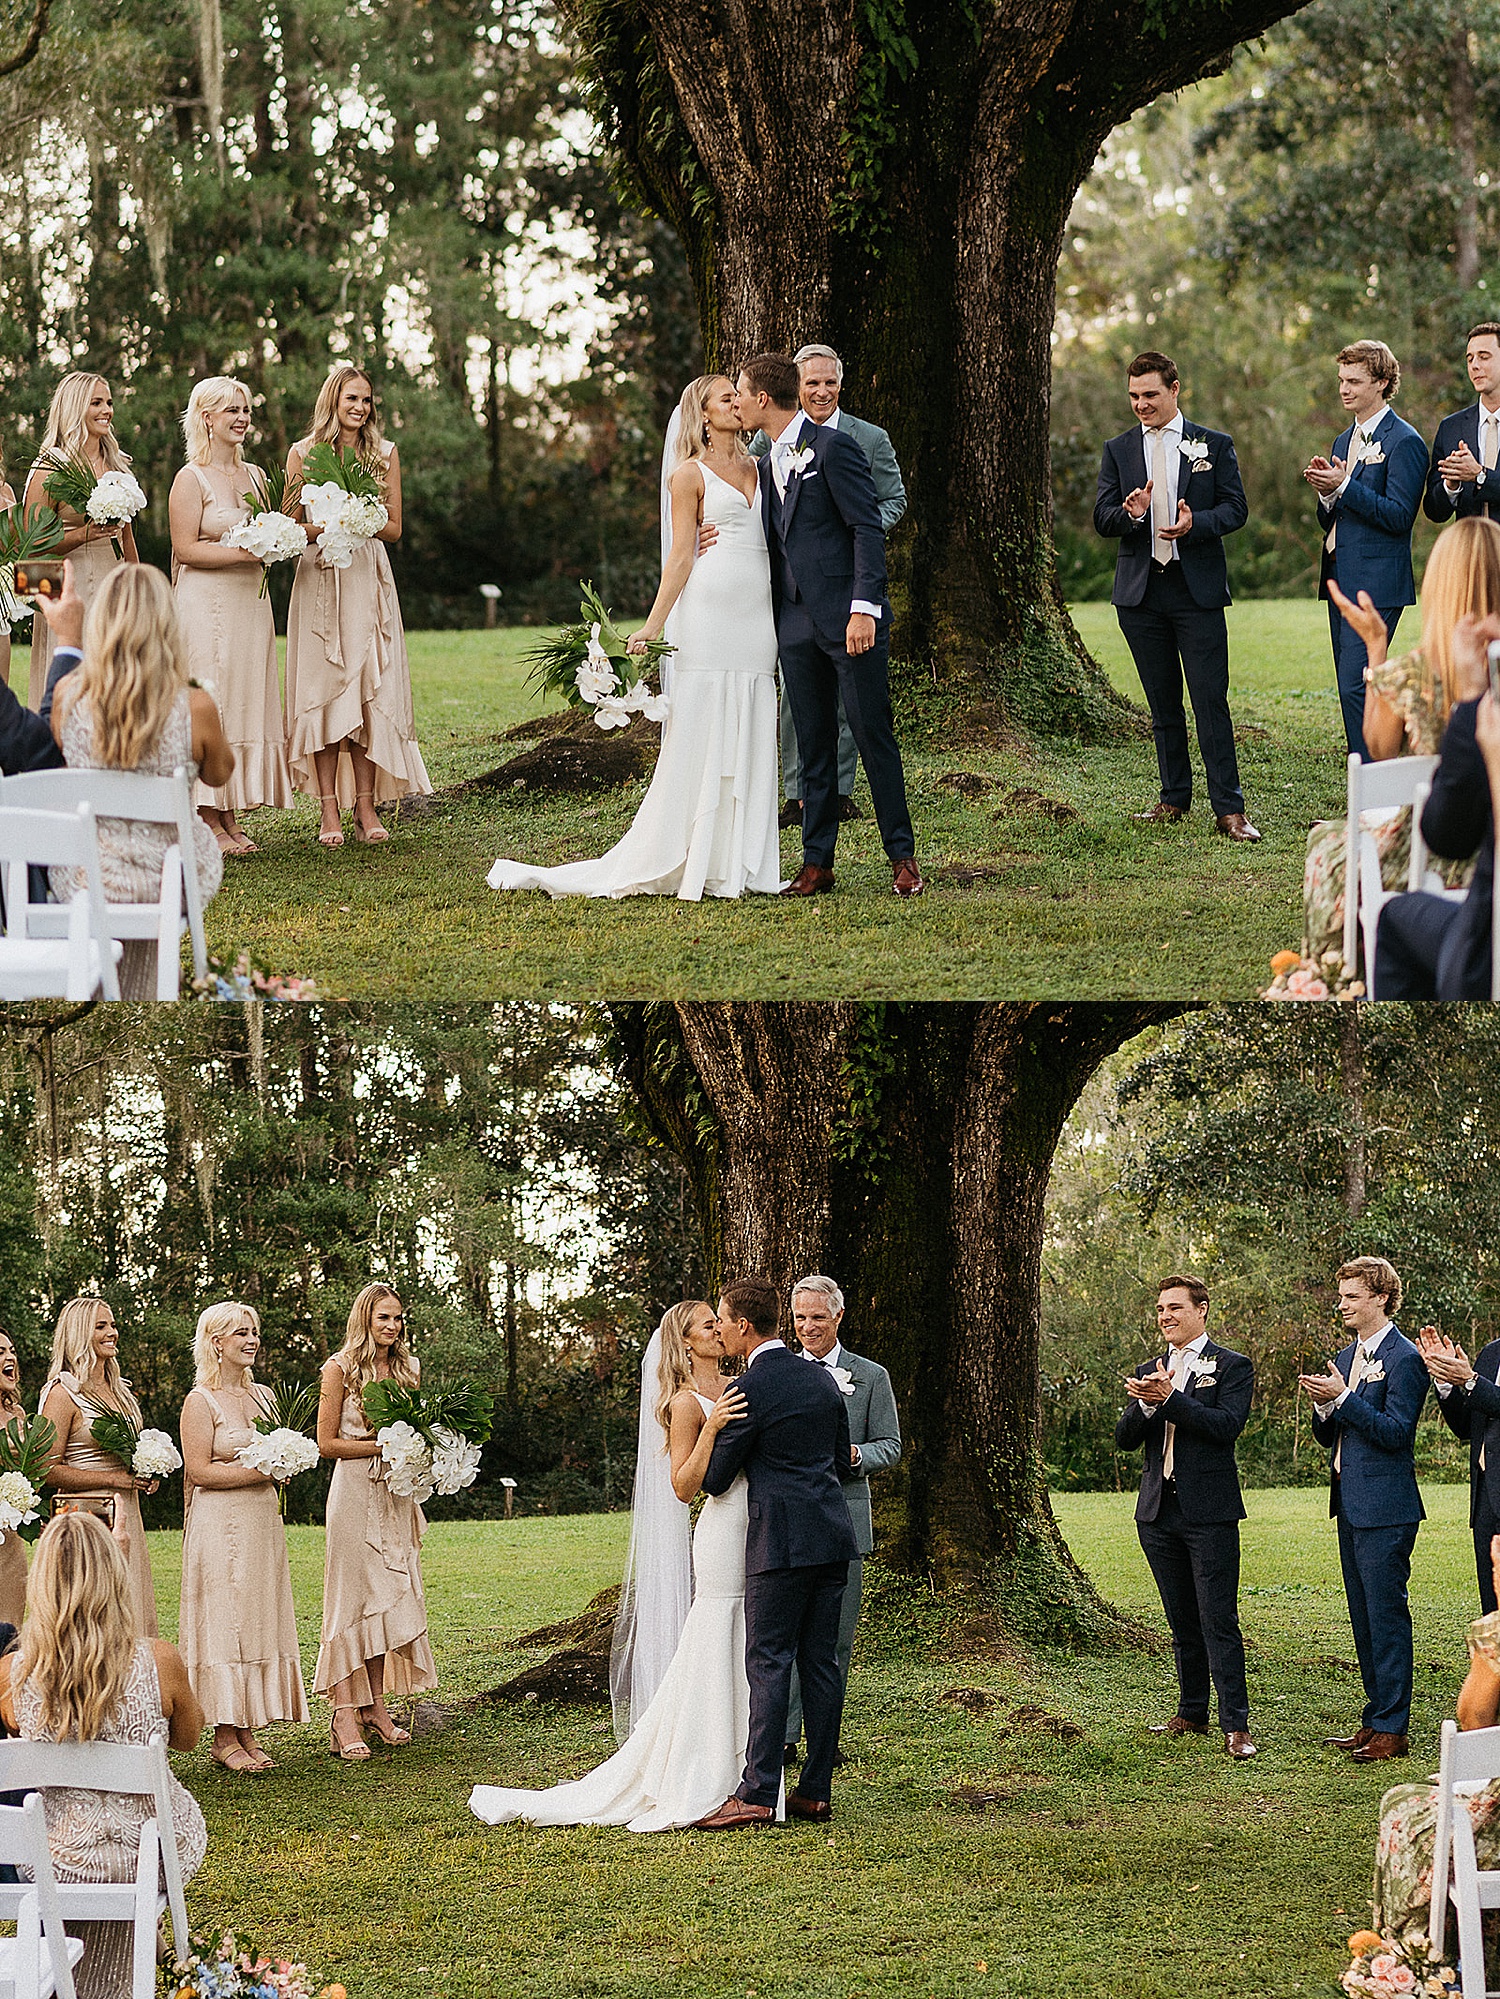 Bride and groom share first kiss at florida wedding with destination wedding photographer 